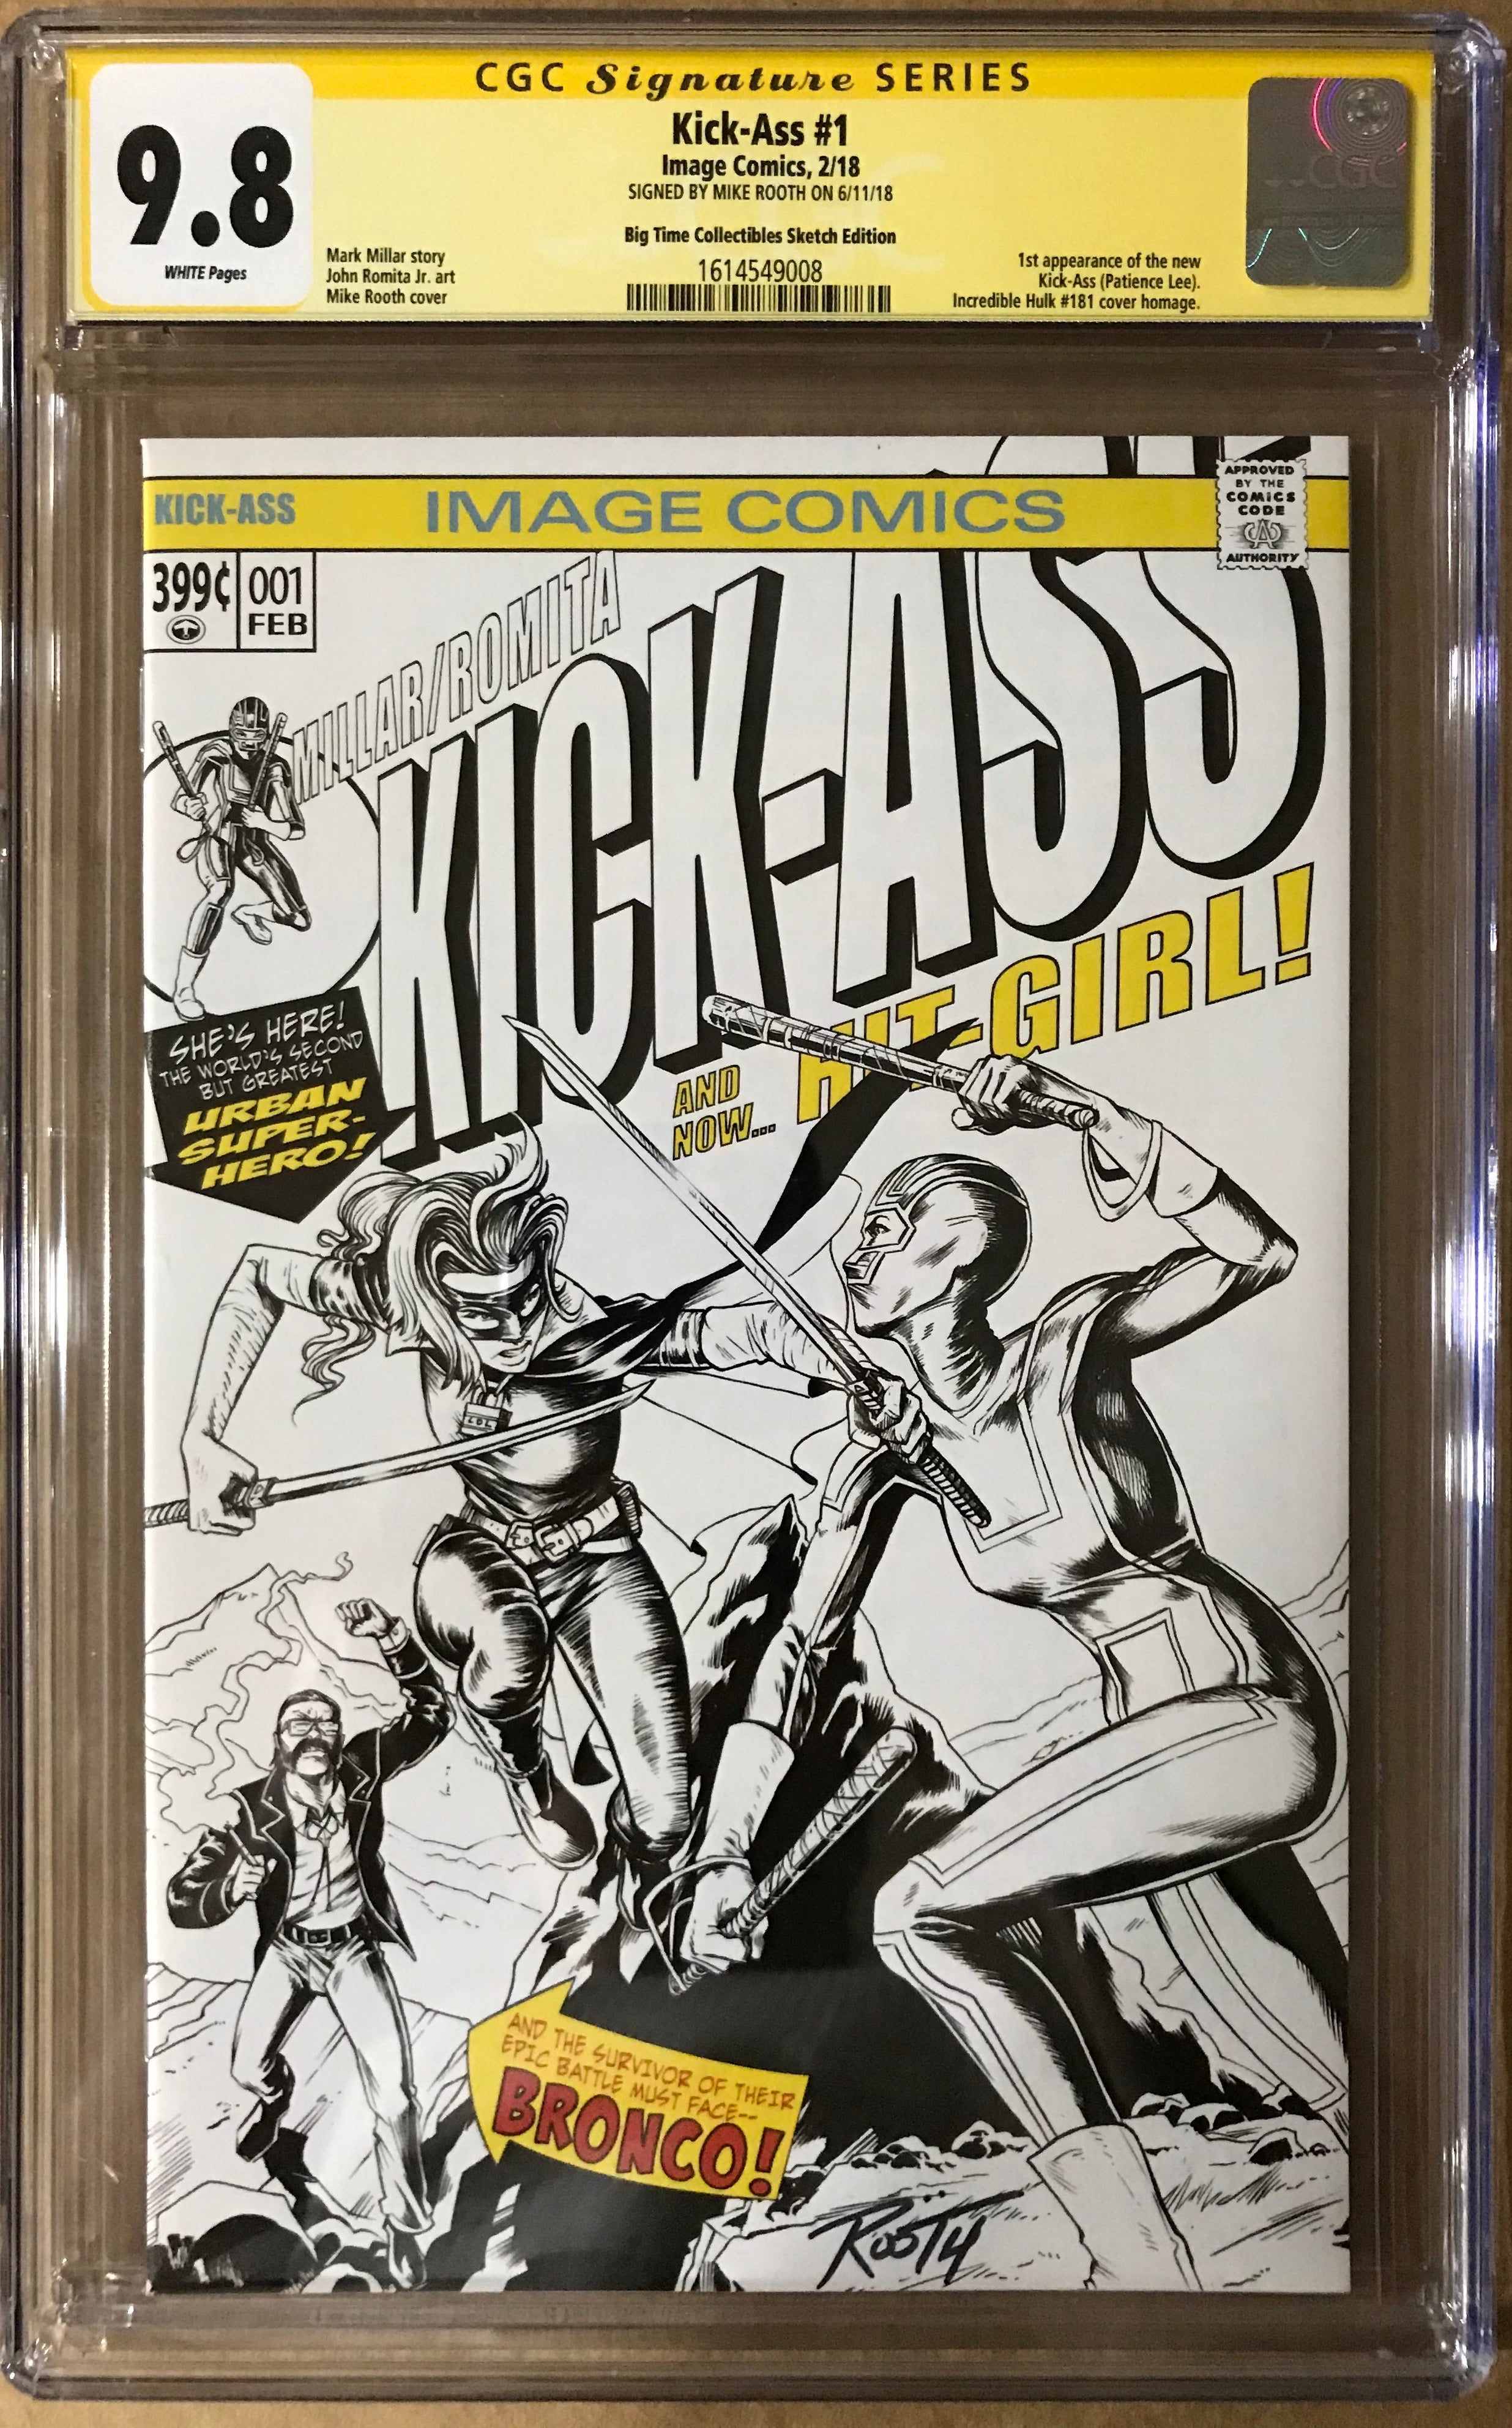 KICK-ASS #1 EXCLUSIVE B/W HOMAGE COVER CGC 9.8 SIGNED BY MIKE ROOTH